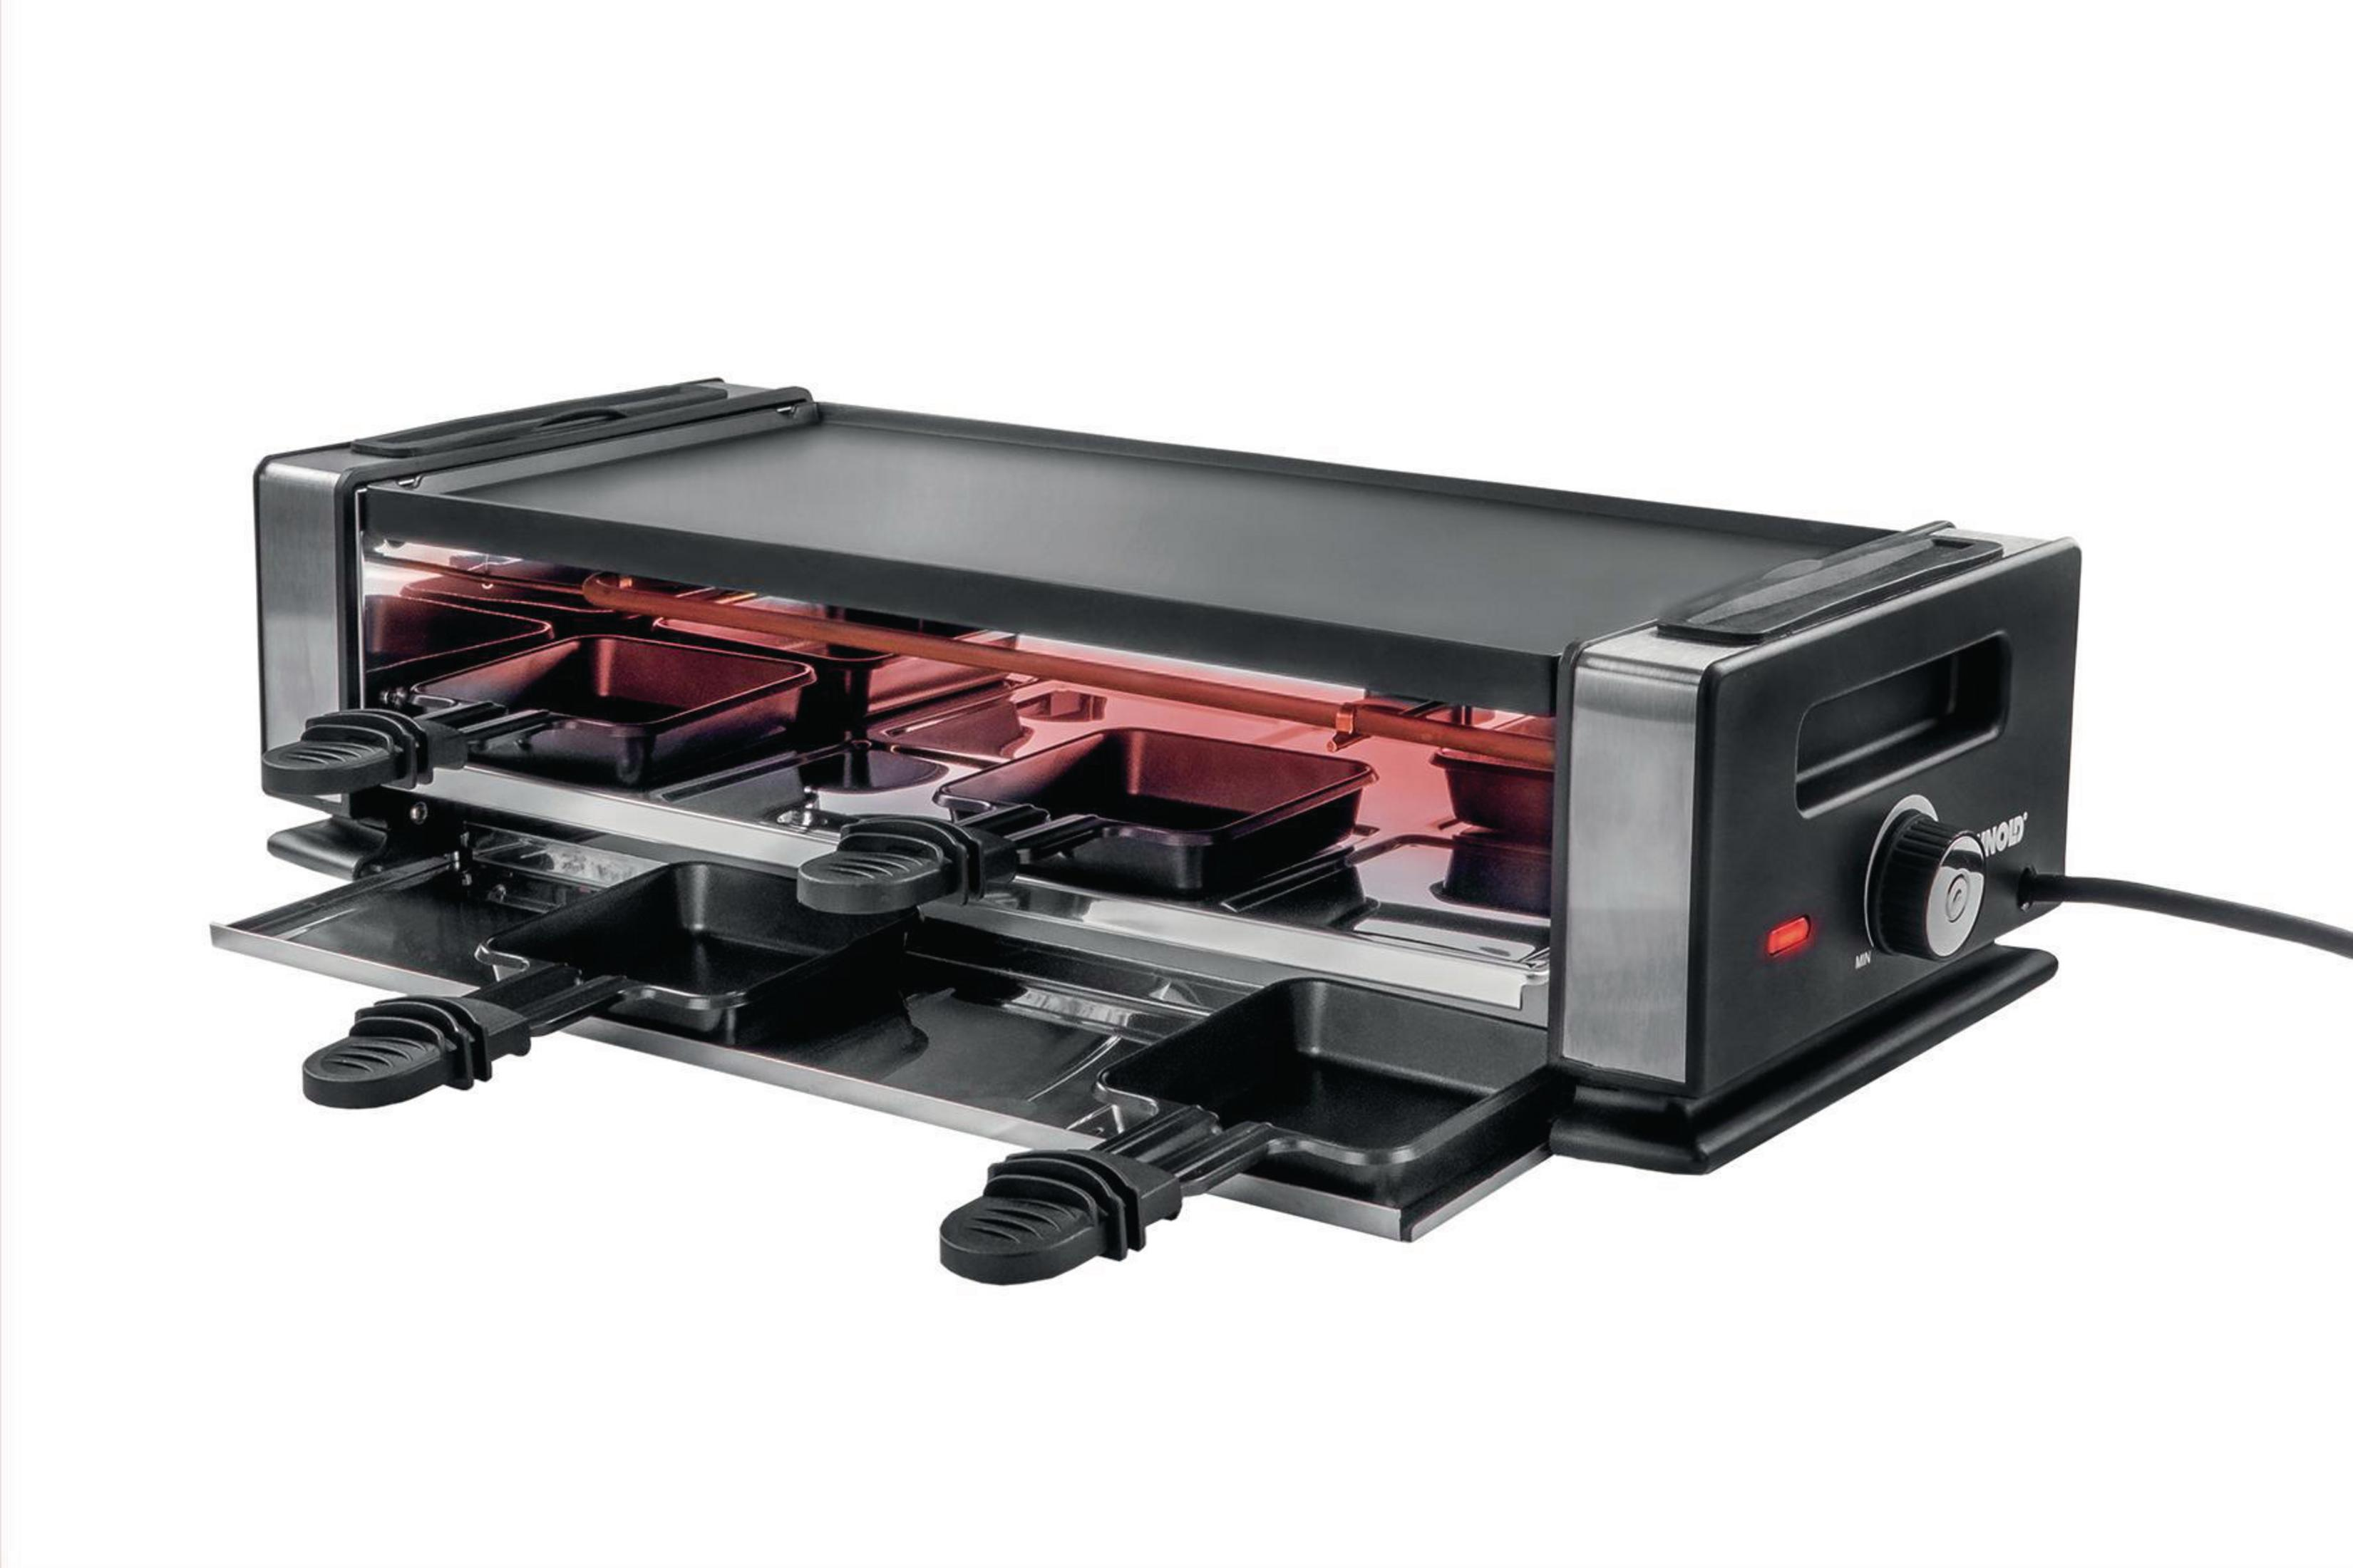 48760 BASIC Raclette UNOLD DELICE